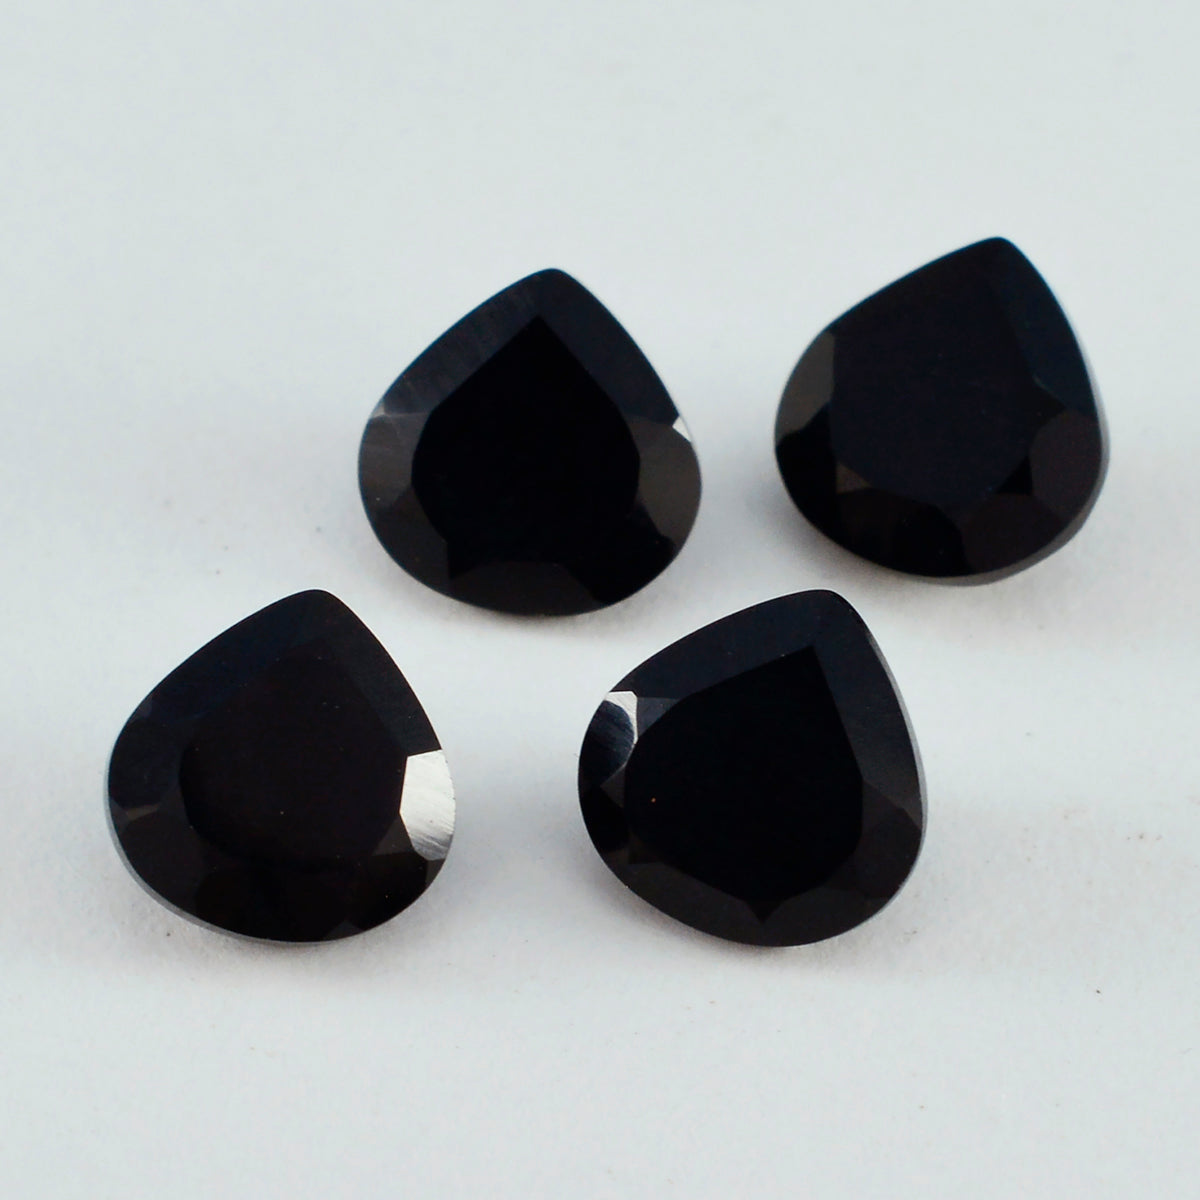 Riyogems 1PC Natural Black Onyx Faceted 12x12 mm Heart Shape A+1 Quality Loose Stone